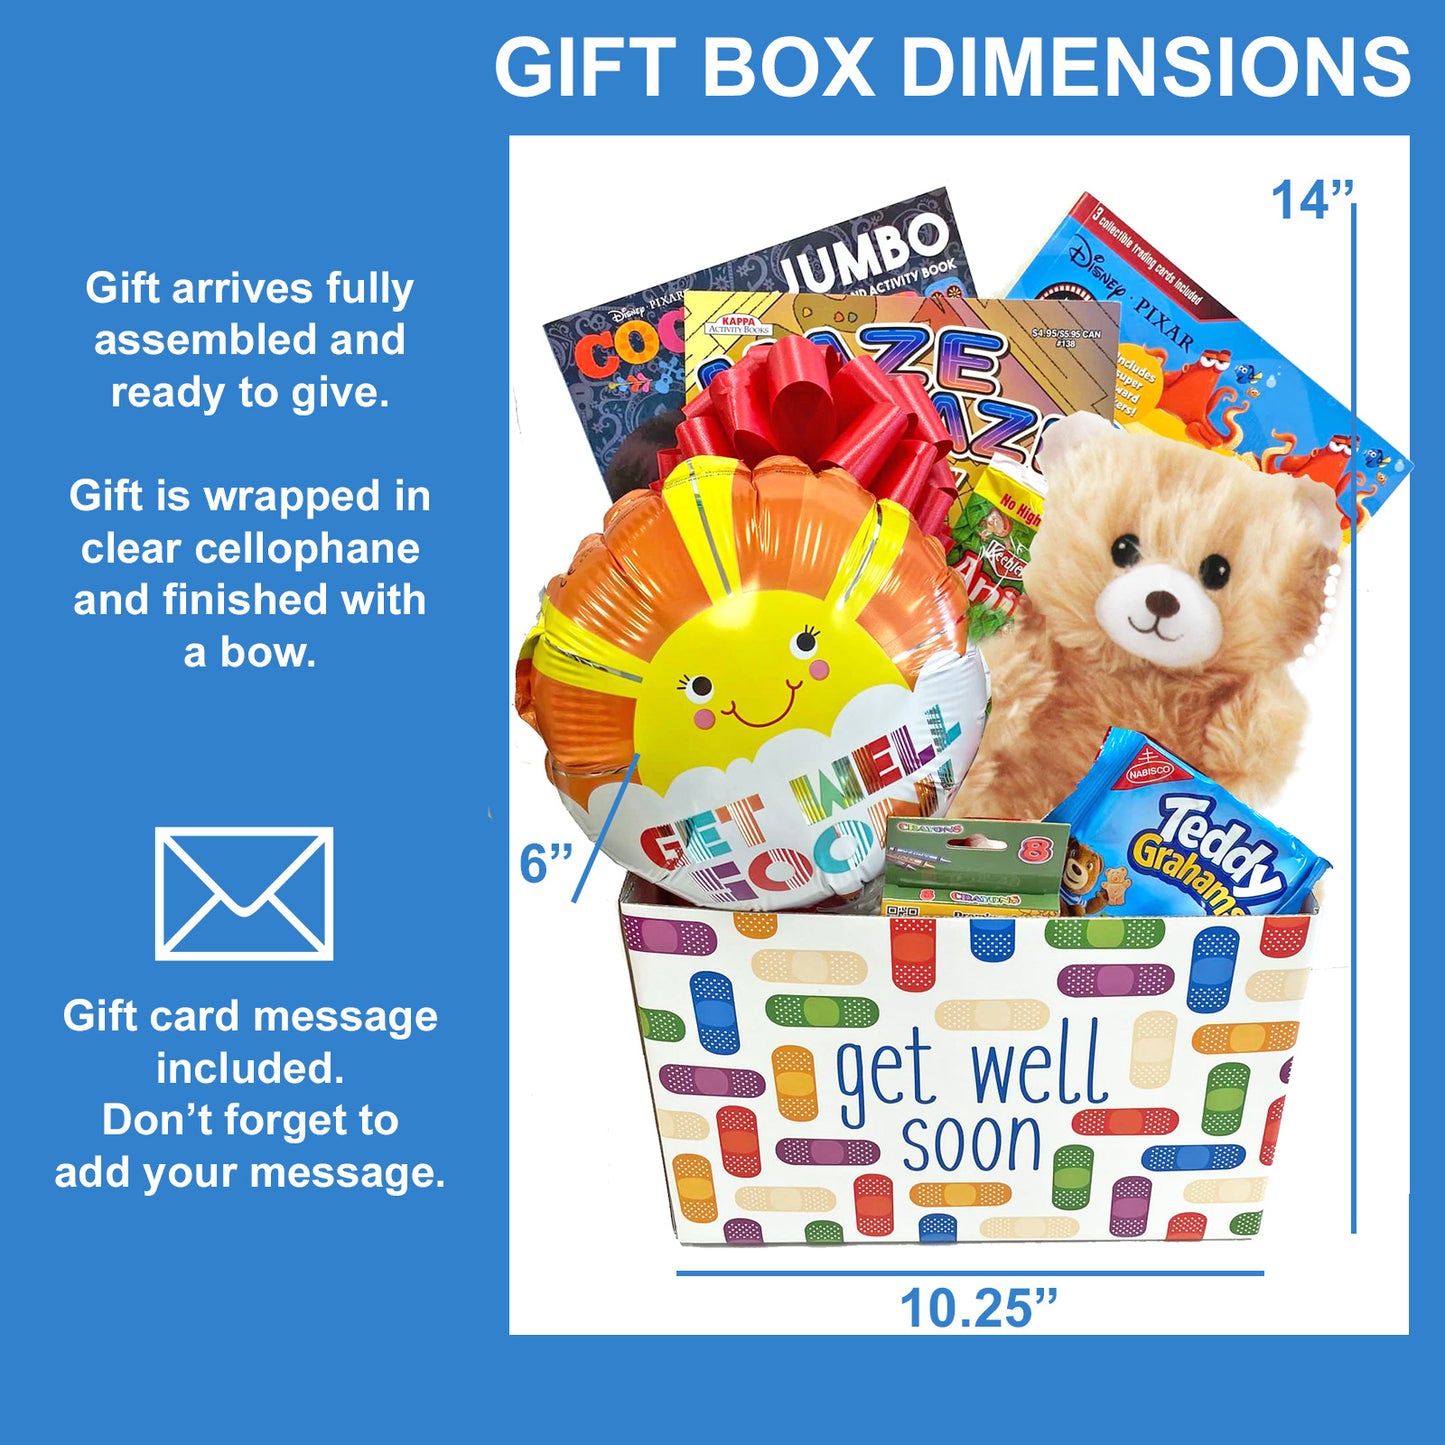 Kids Get Well Gift Box for Boys and Girls Ages 3 to 10 with Activity Books, Snacks and Balloon